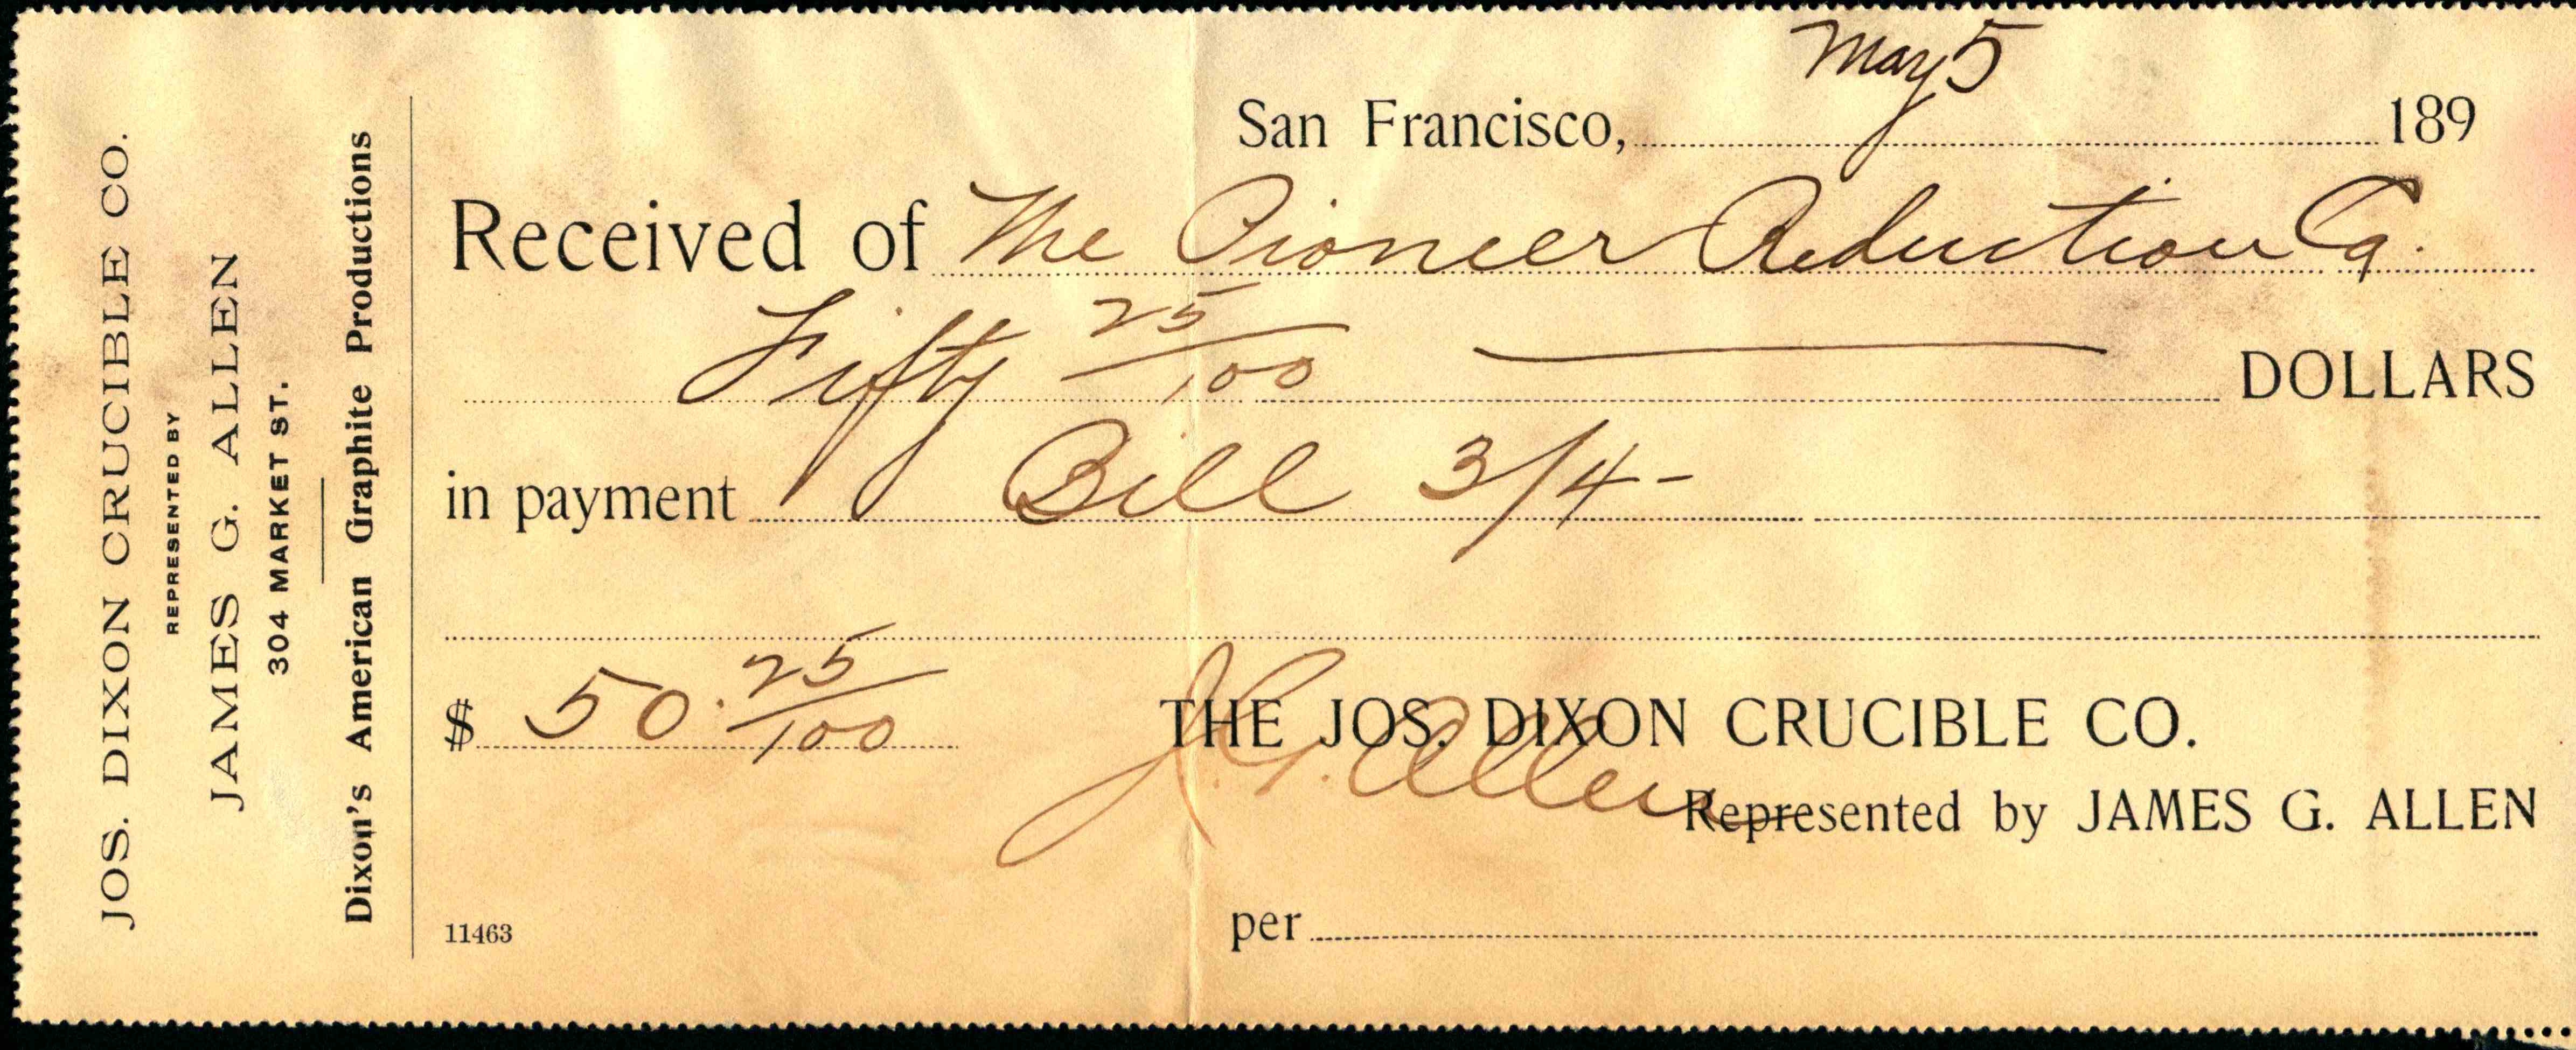 Paid to Pioneer Reduction and on the left hand side Jos. Dixon Crucible Co.